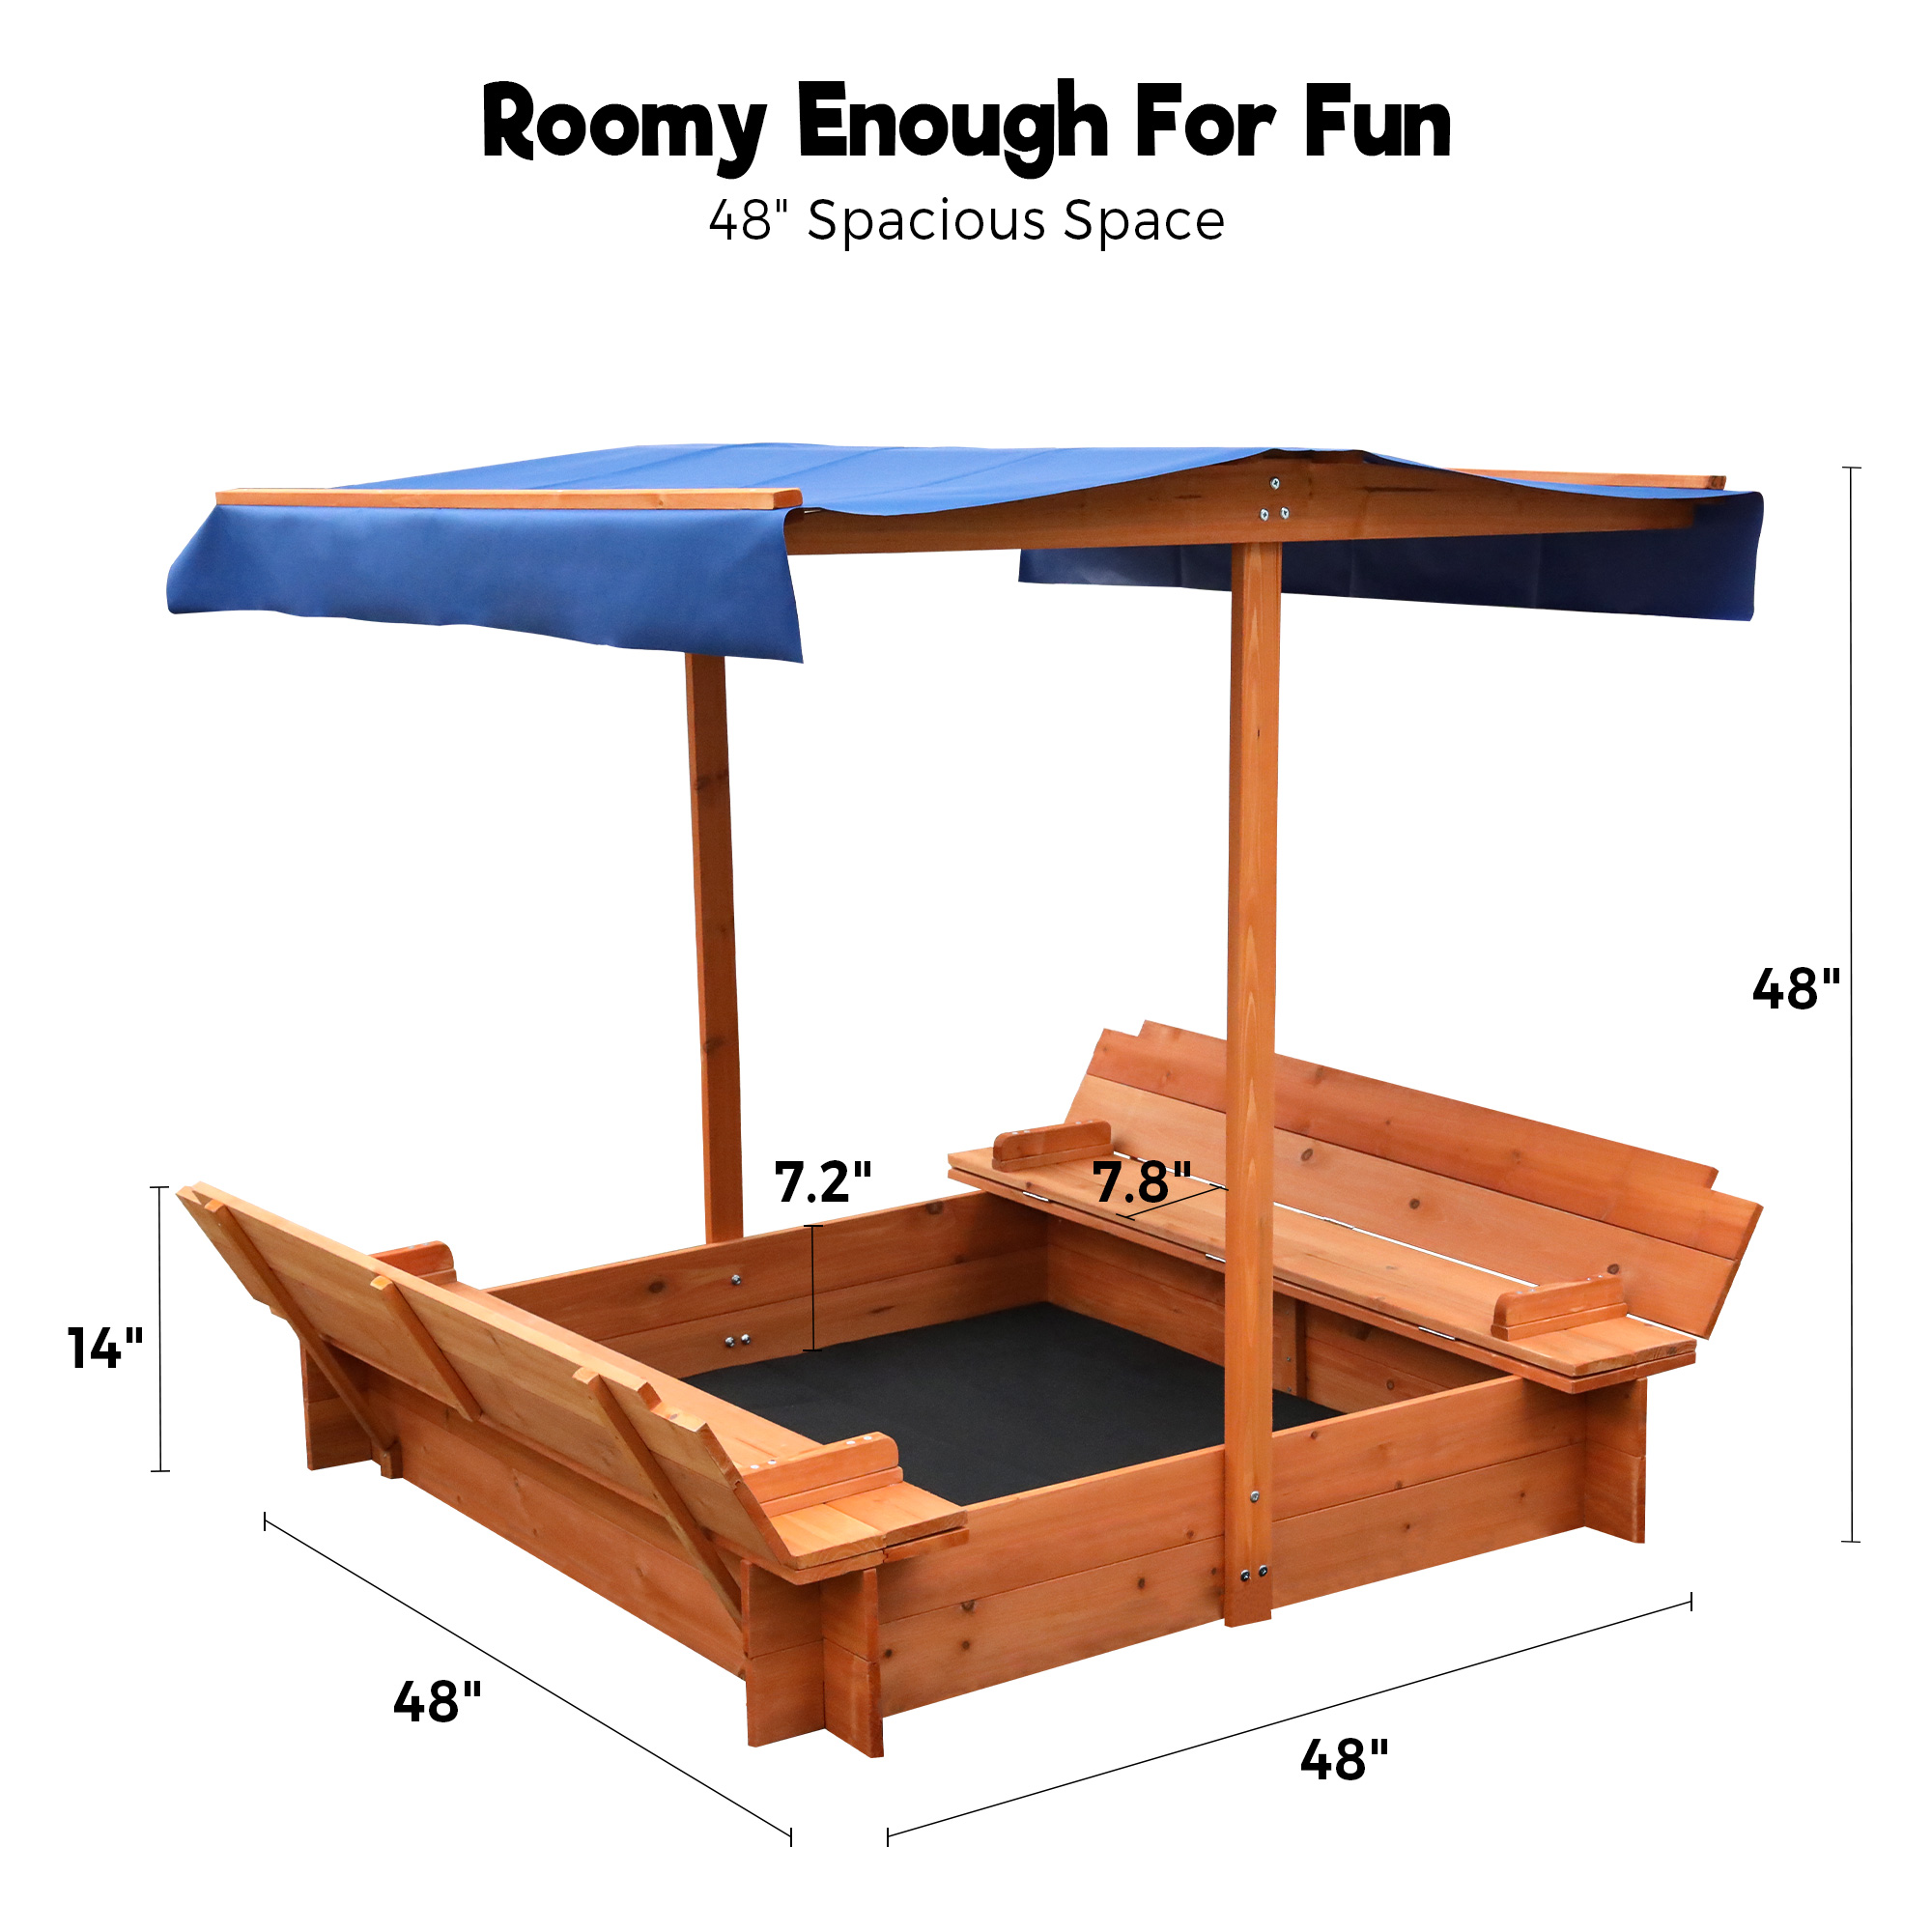 FUNTOK Wooden Sandbox with Cover, 48x48"Sand Boxes for Kids w/ 2 Foldable Bench Seats & UV-Resistant Canopy, Children Outdoor Sandbox w/ Lid for Backyard Lawn - image 3 of 8